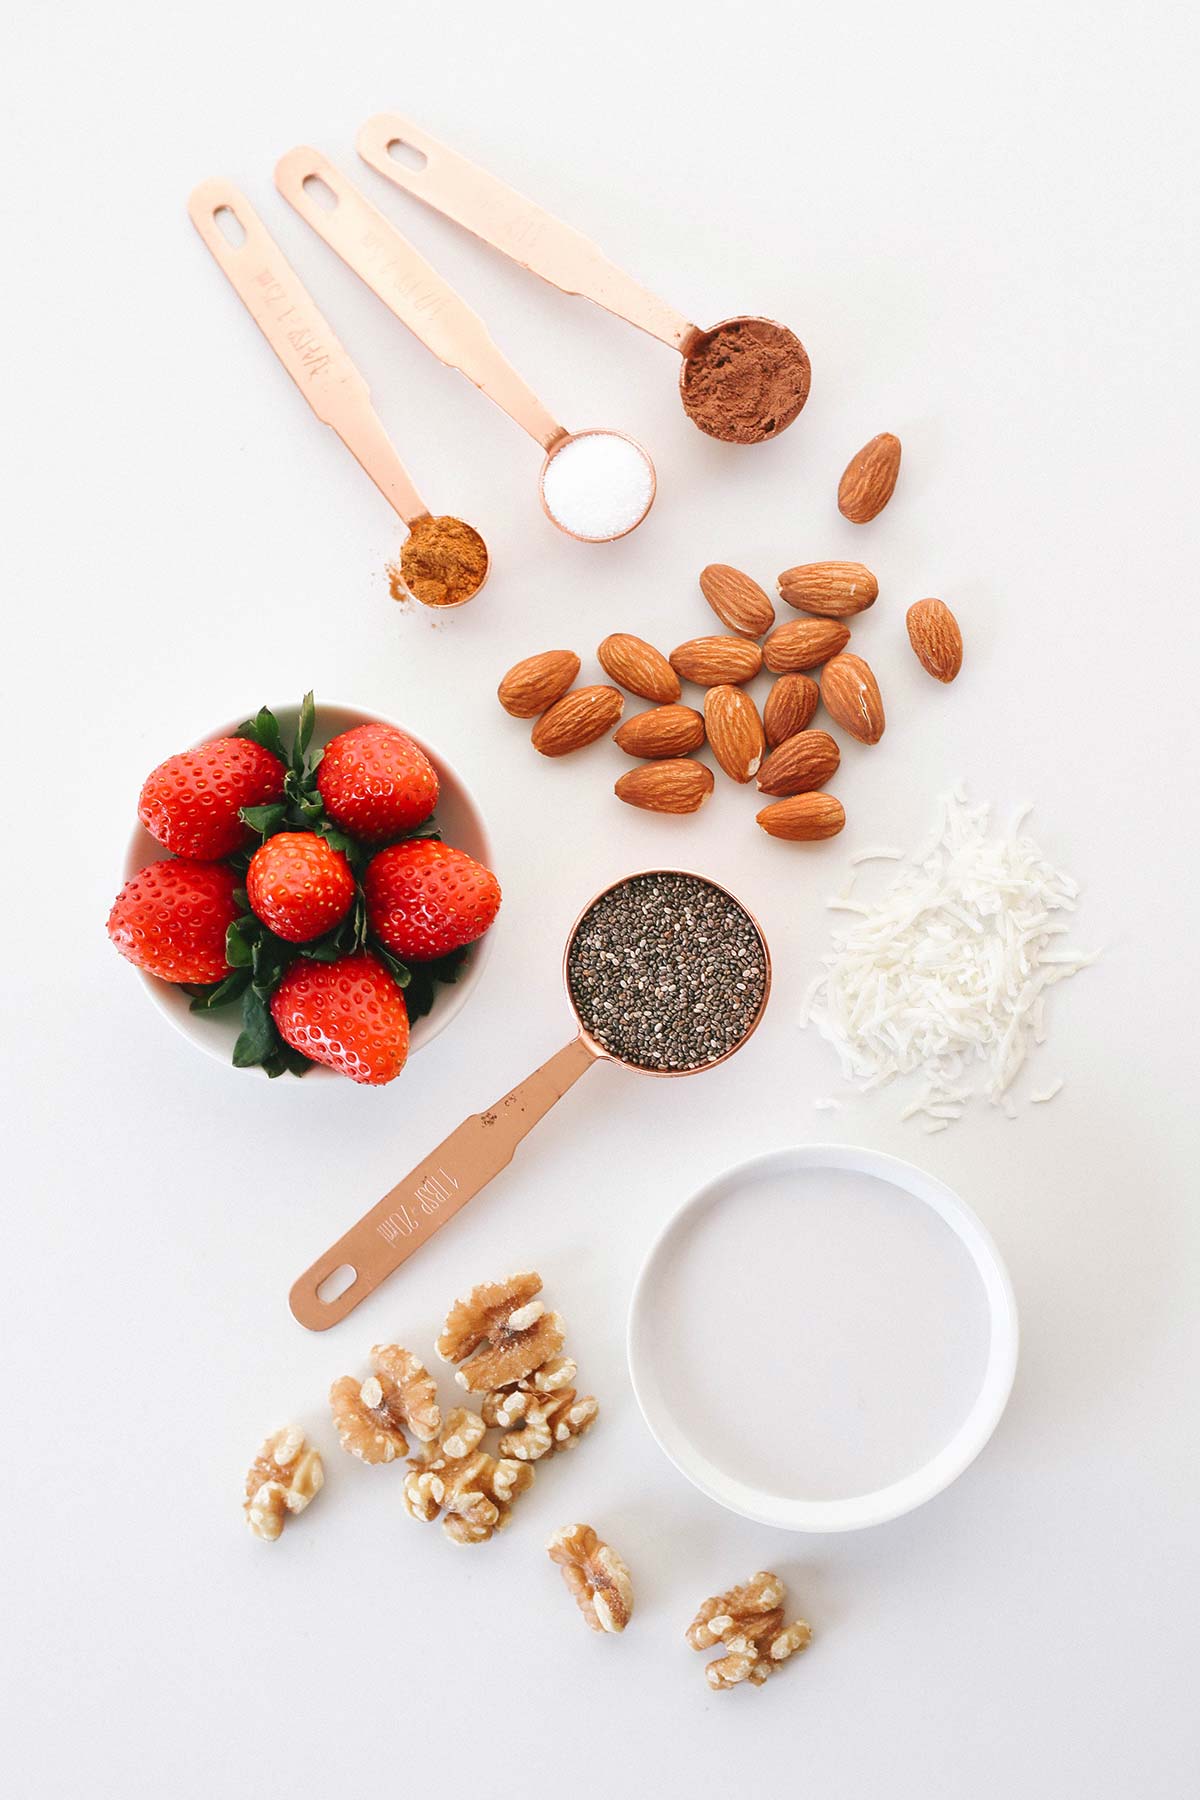 Chia pudding for keto and low carb. Easy overnight recipe with strawberries and almonds.